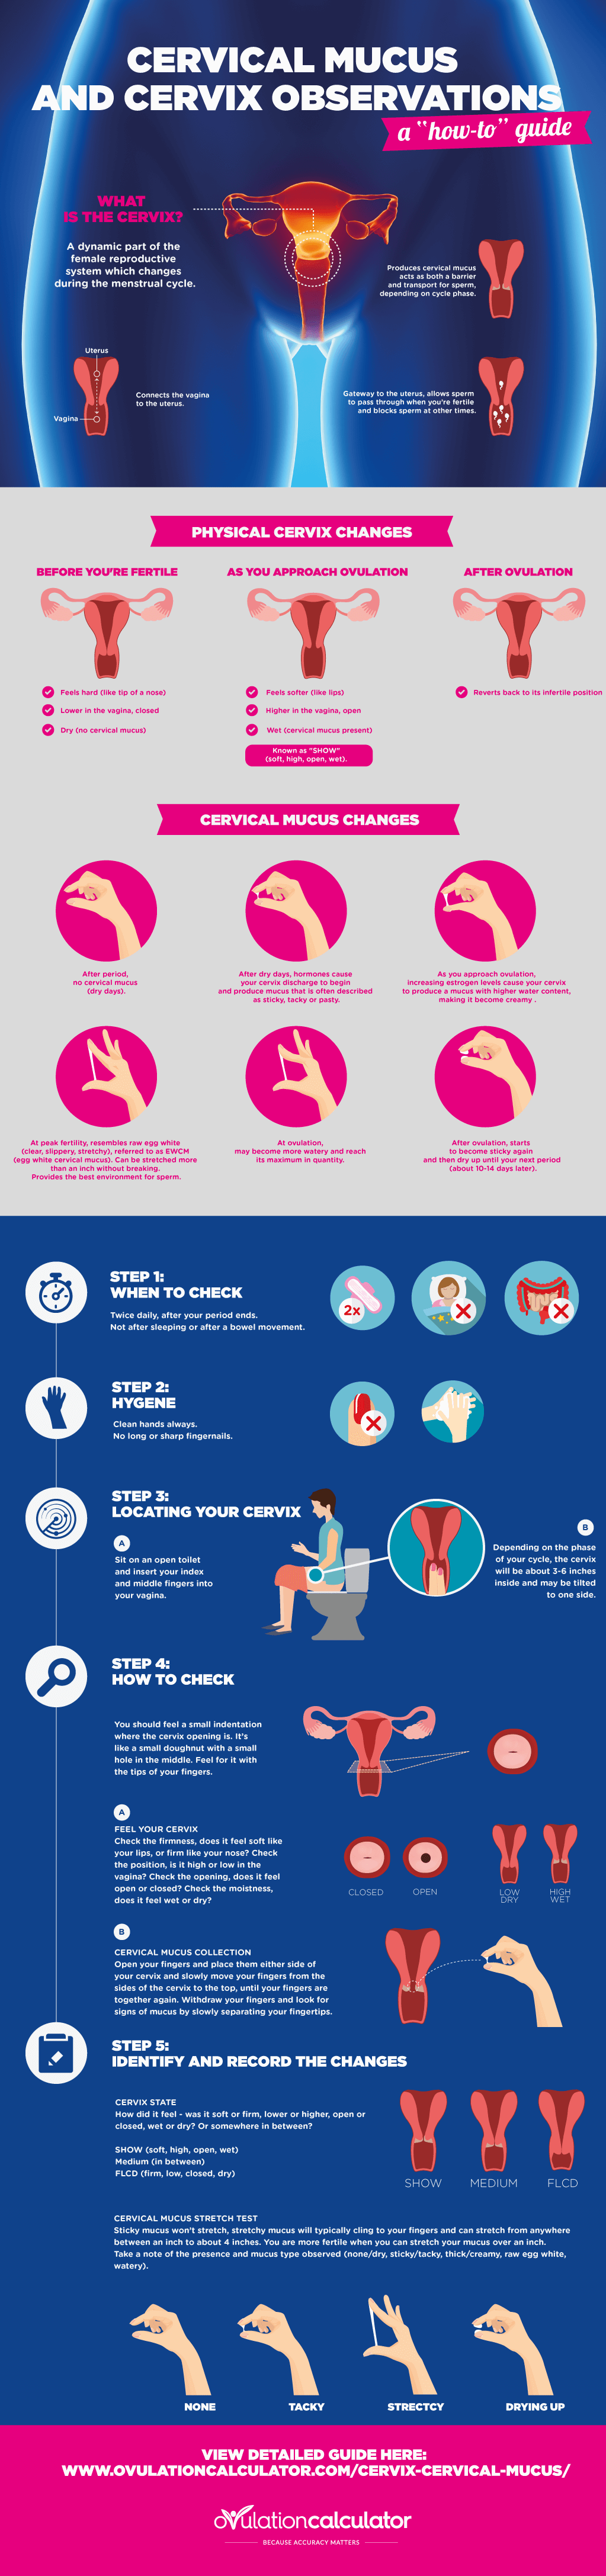 Cervix and Cervical Mucus Observations Step-by-Step Infographic